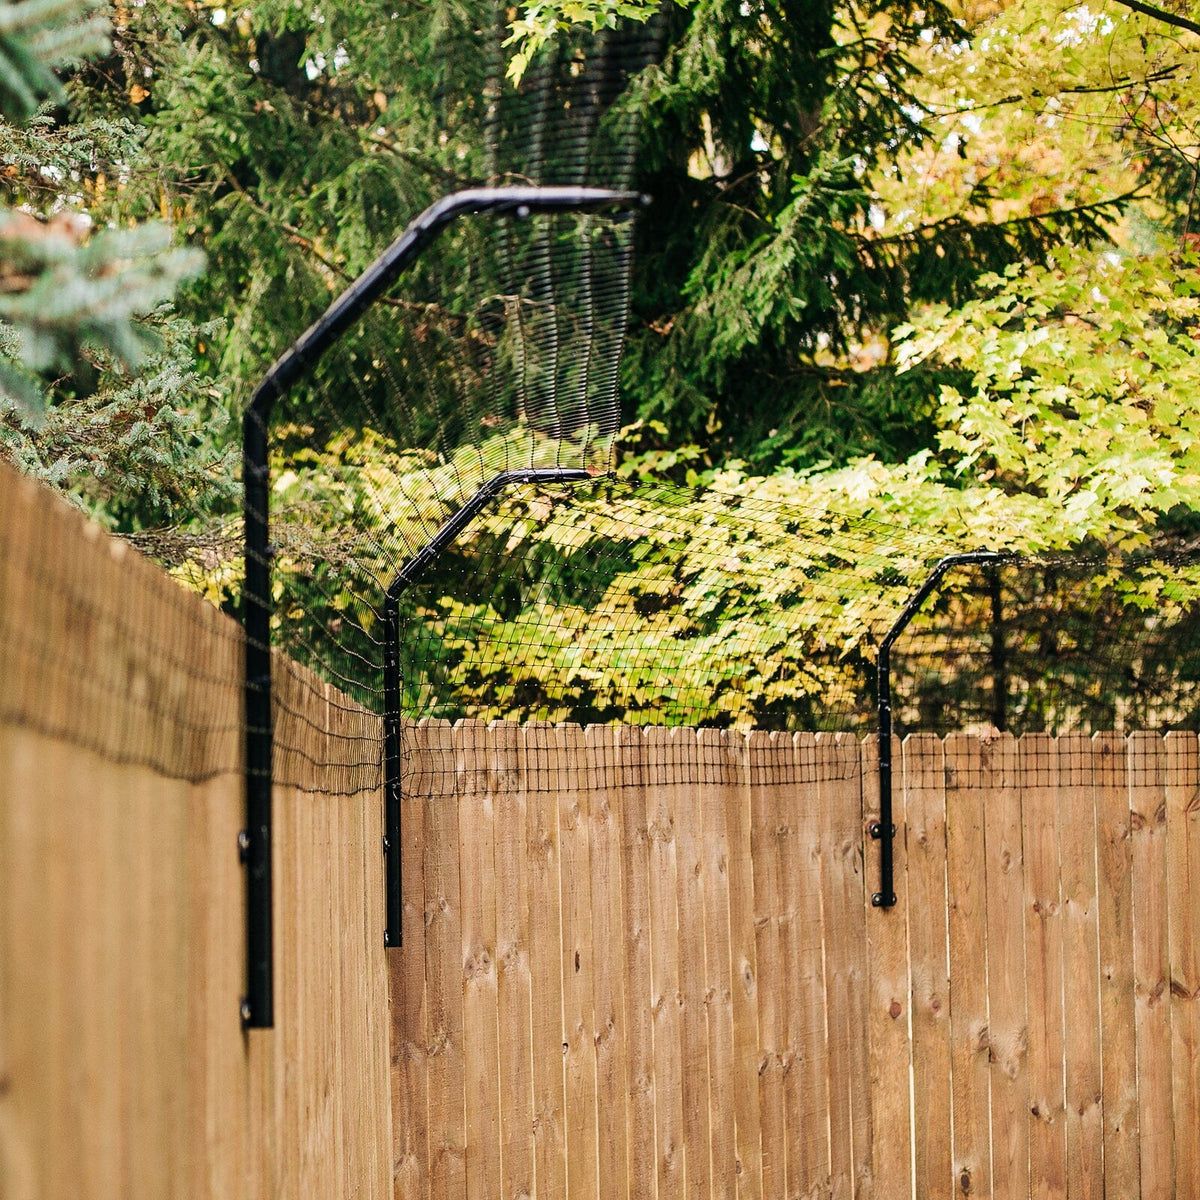 Square-shaped curved extension piece for pet fence customization from Dog Proofer.